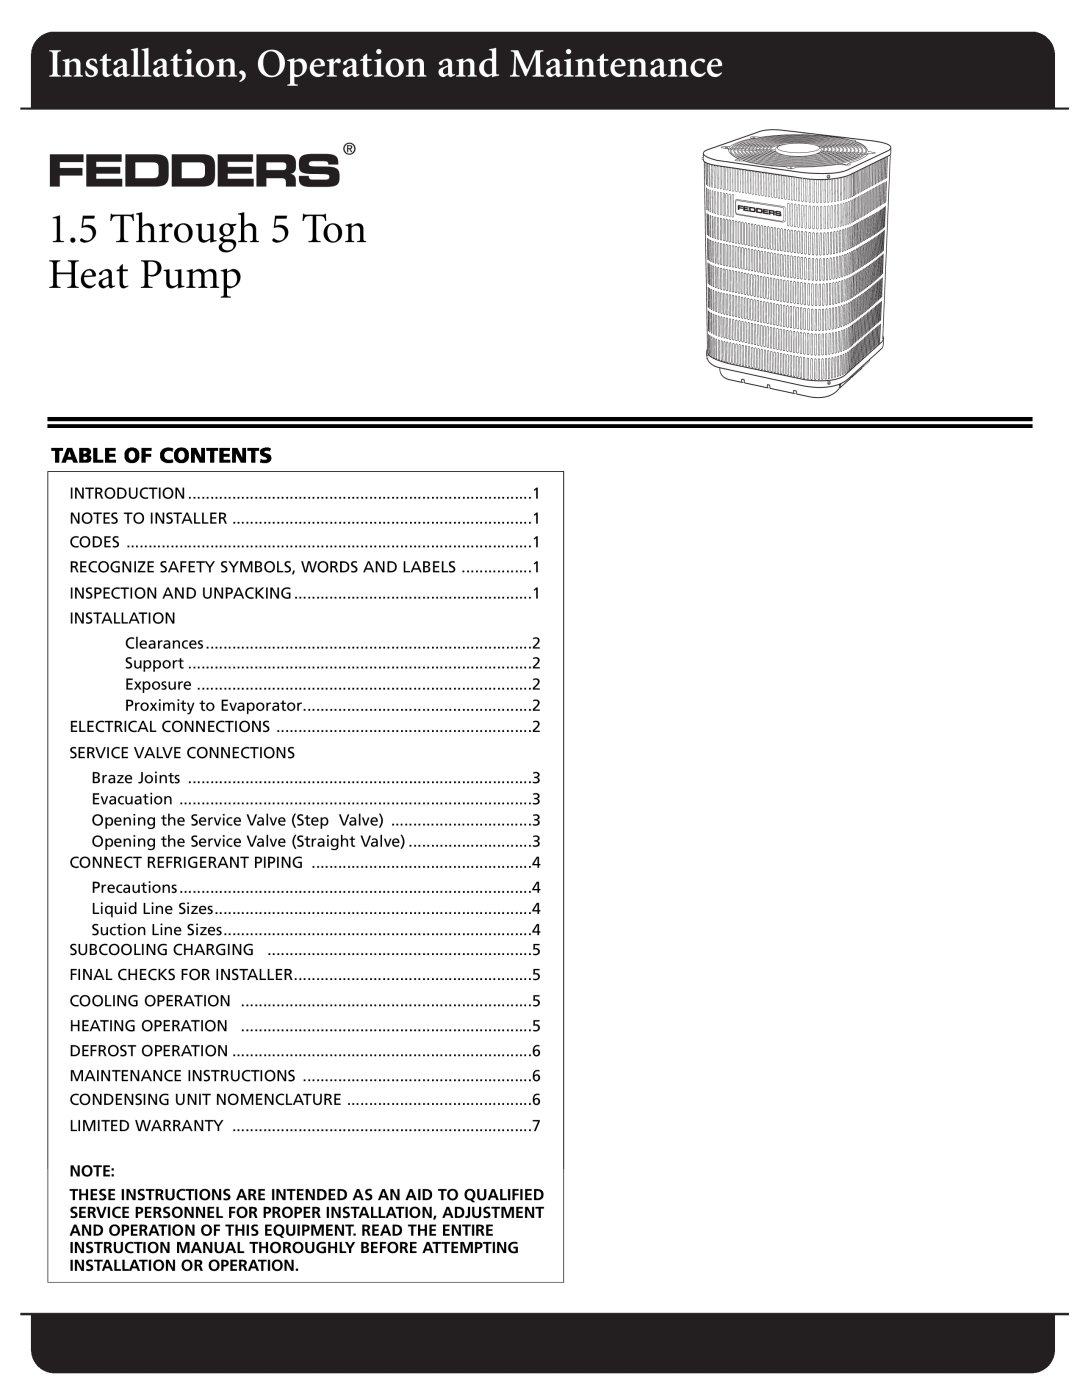 Fedders CH18ABD1 warranty Table Of Contents, And Operation Of This Equipment. Read The Entire, Installation Or Operation 